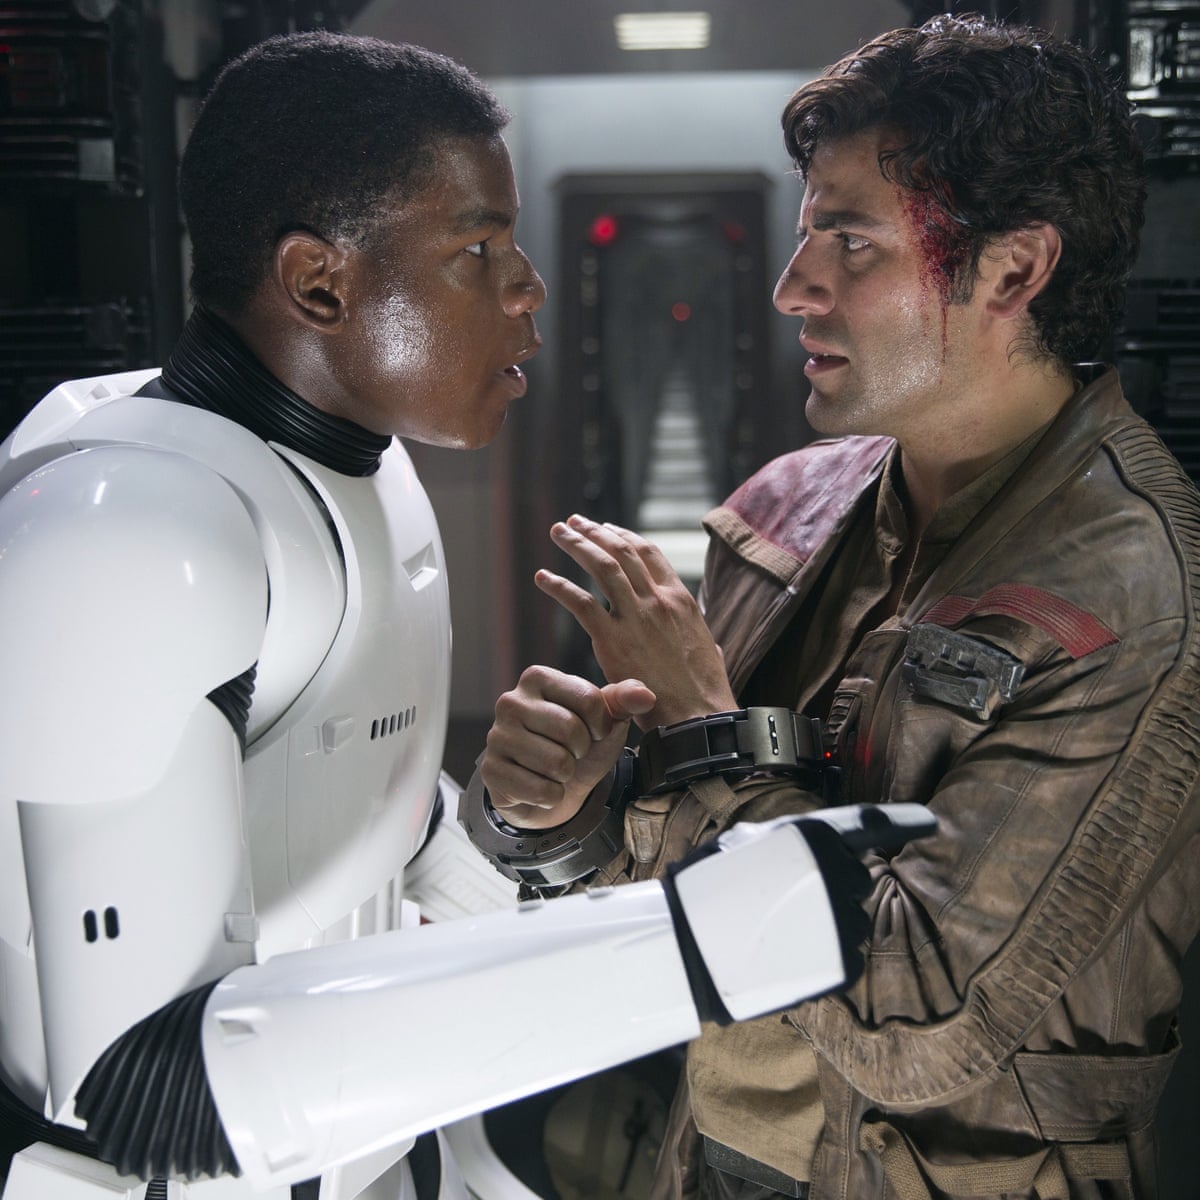 The Force Awakens: Star Wars Actors' Thoughts on the Franchise